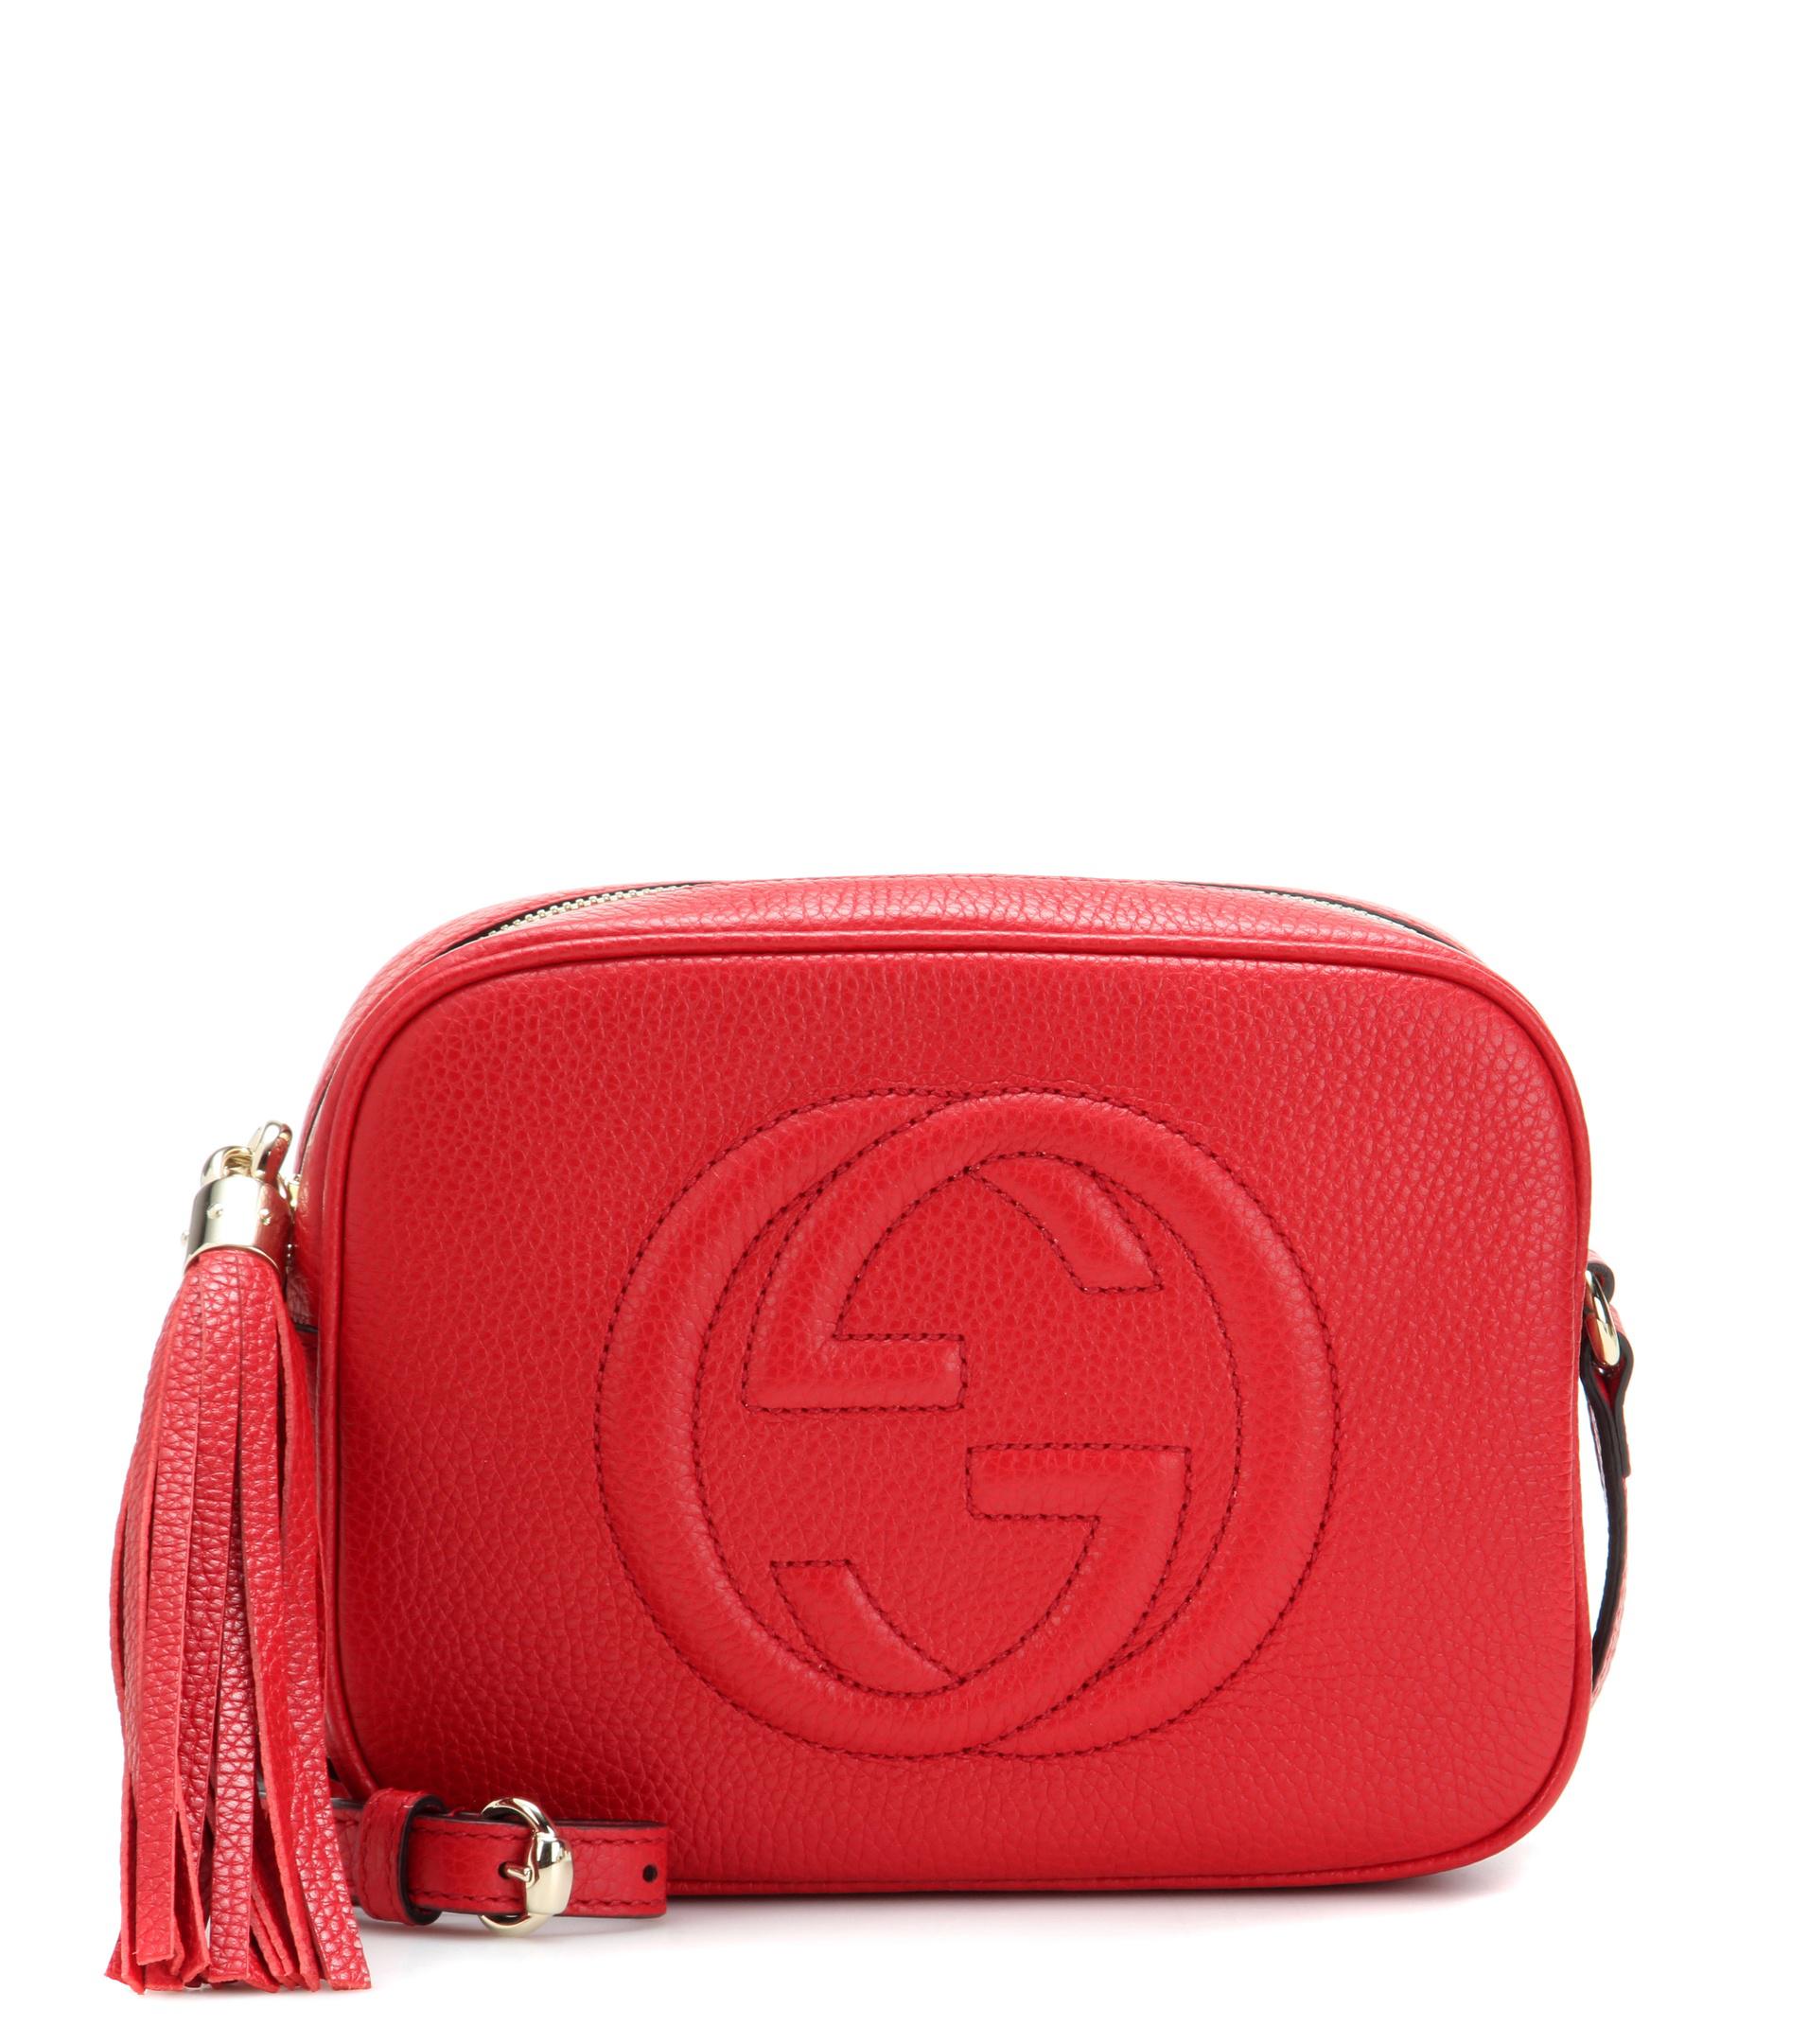 Gucci Soho Disco Leather Shoulder Bag in Red - Lyst